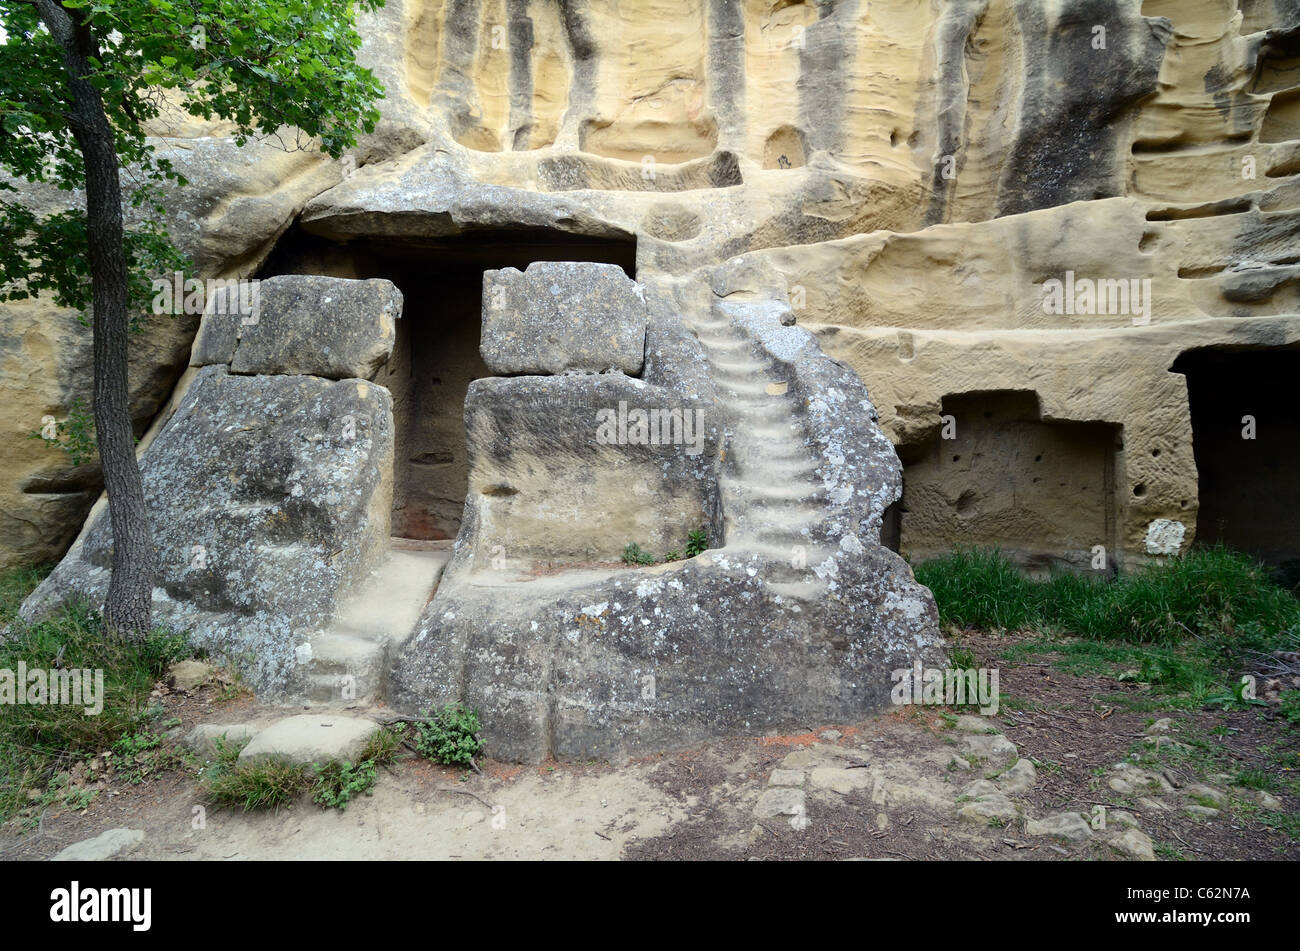 Troglodyte House or Cave Dwelling with Rock-Cut Staircase to First Floor, Grottes de Calès, Lamanon, Provence, France Stock Photo